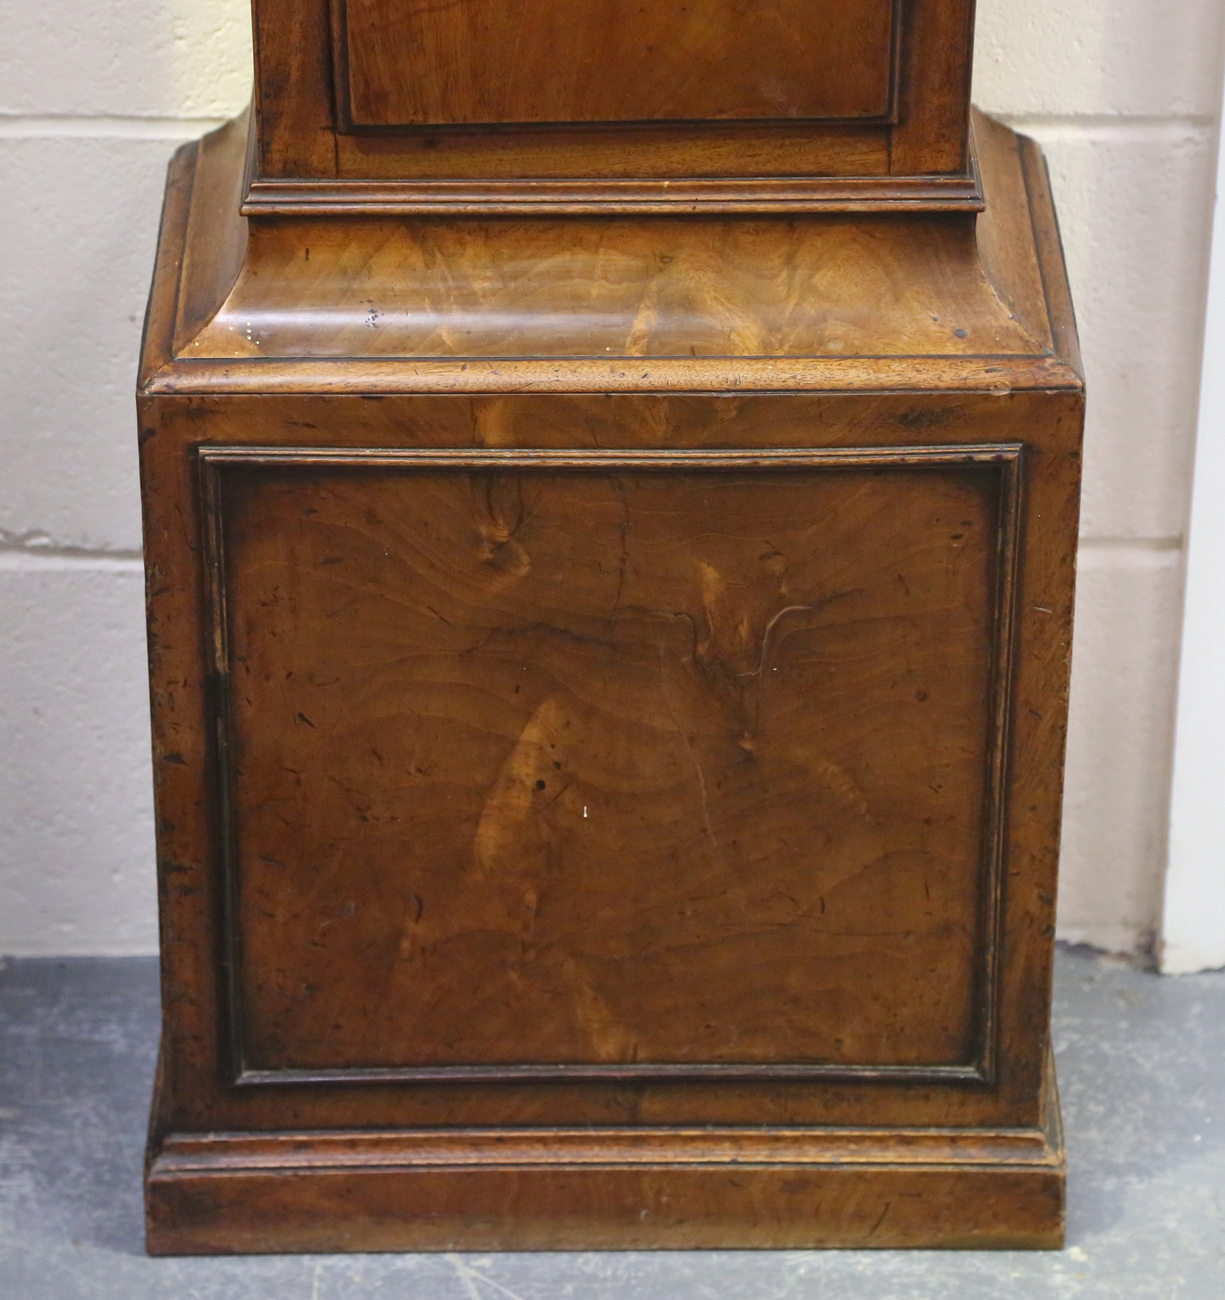 An early 19th century mahogany longcase clock with eight day movement striking hours on a bell, - Image 7 of 14